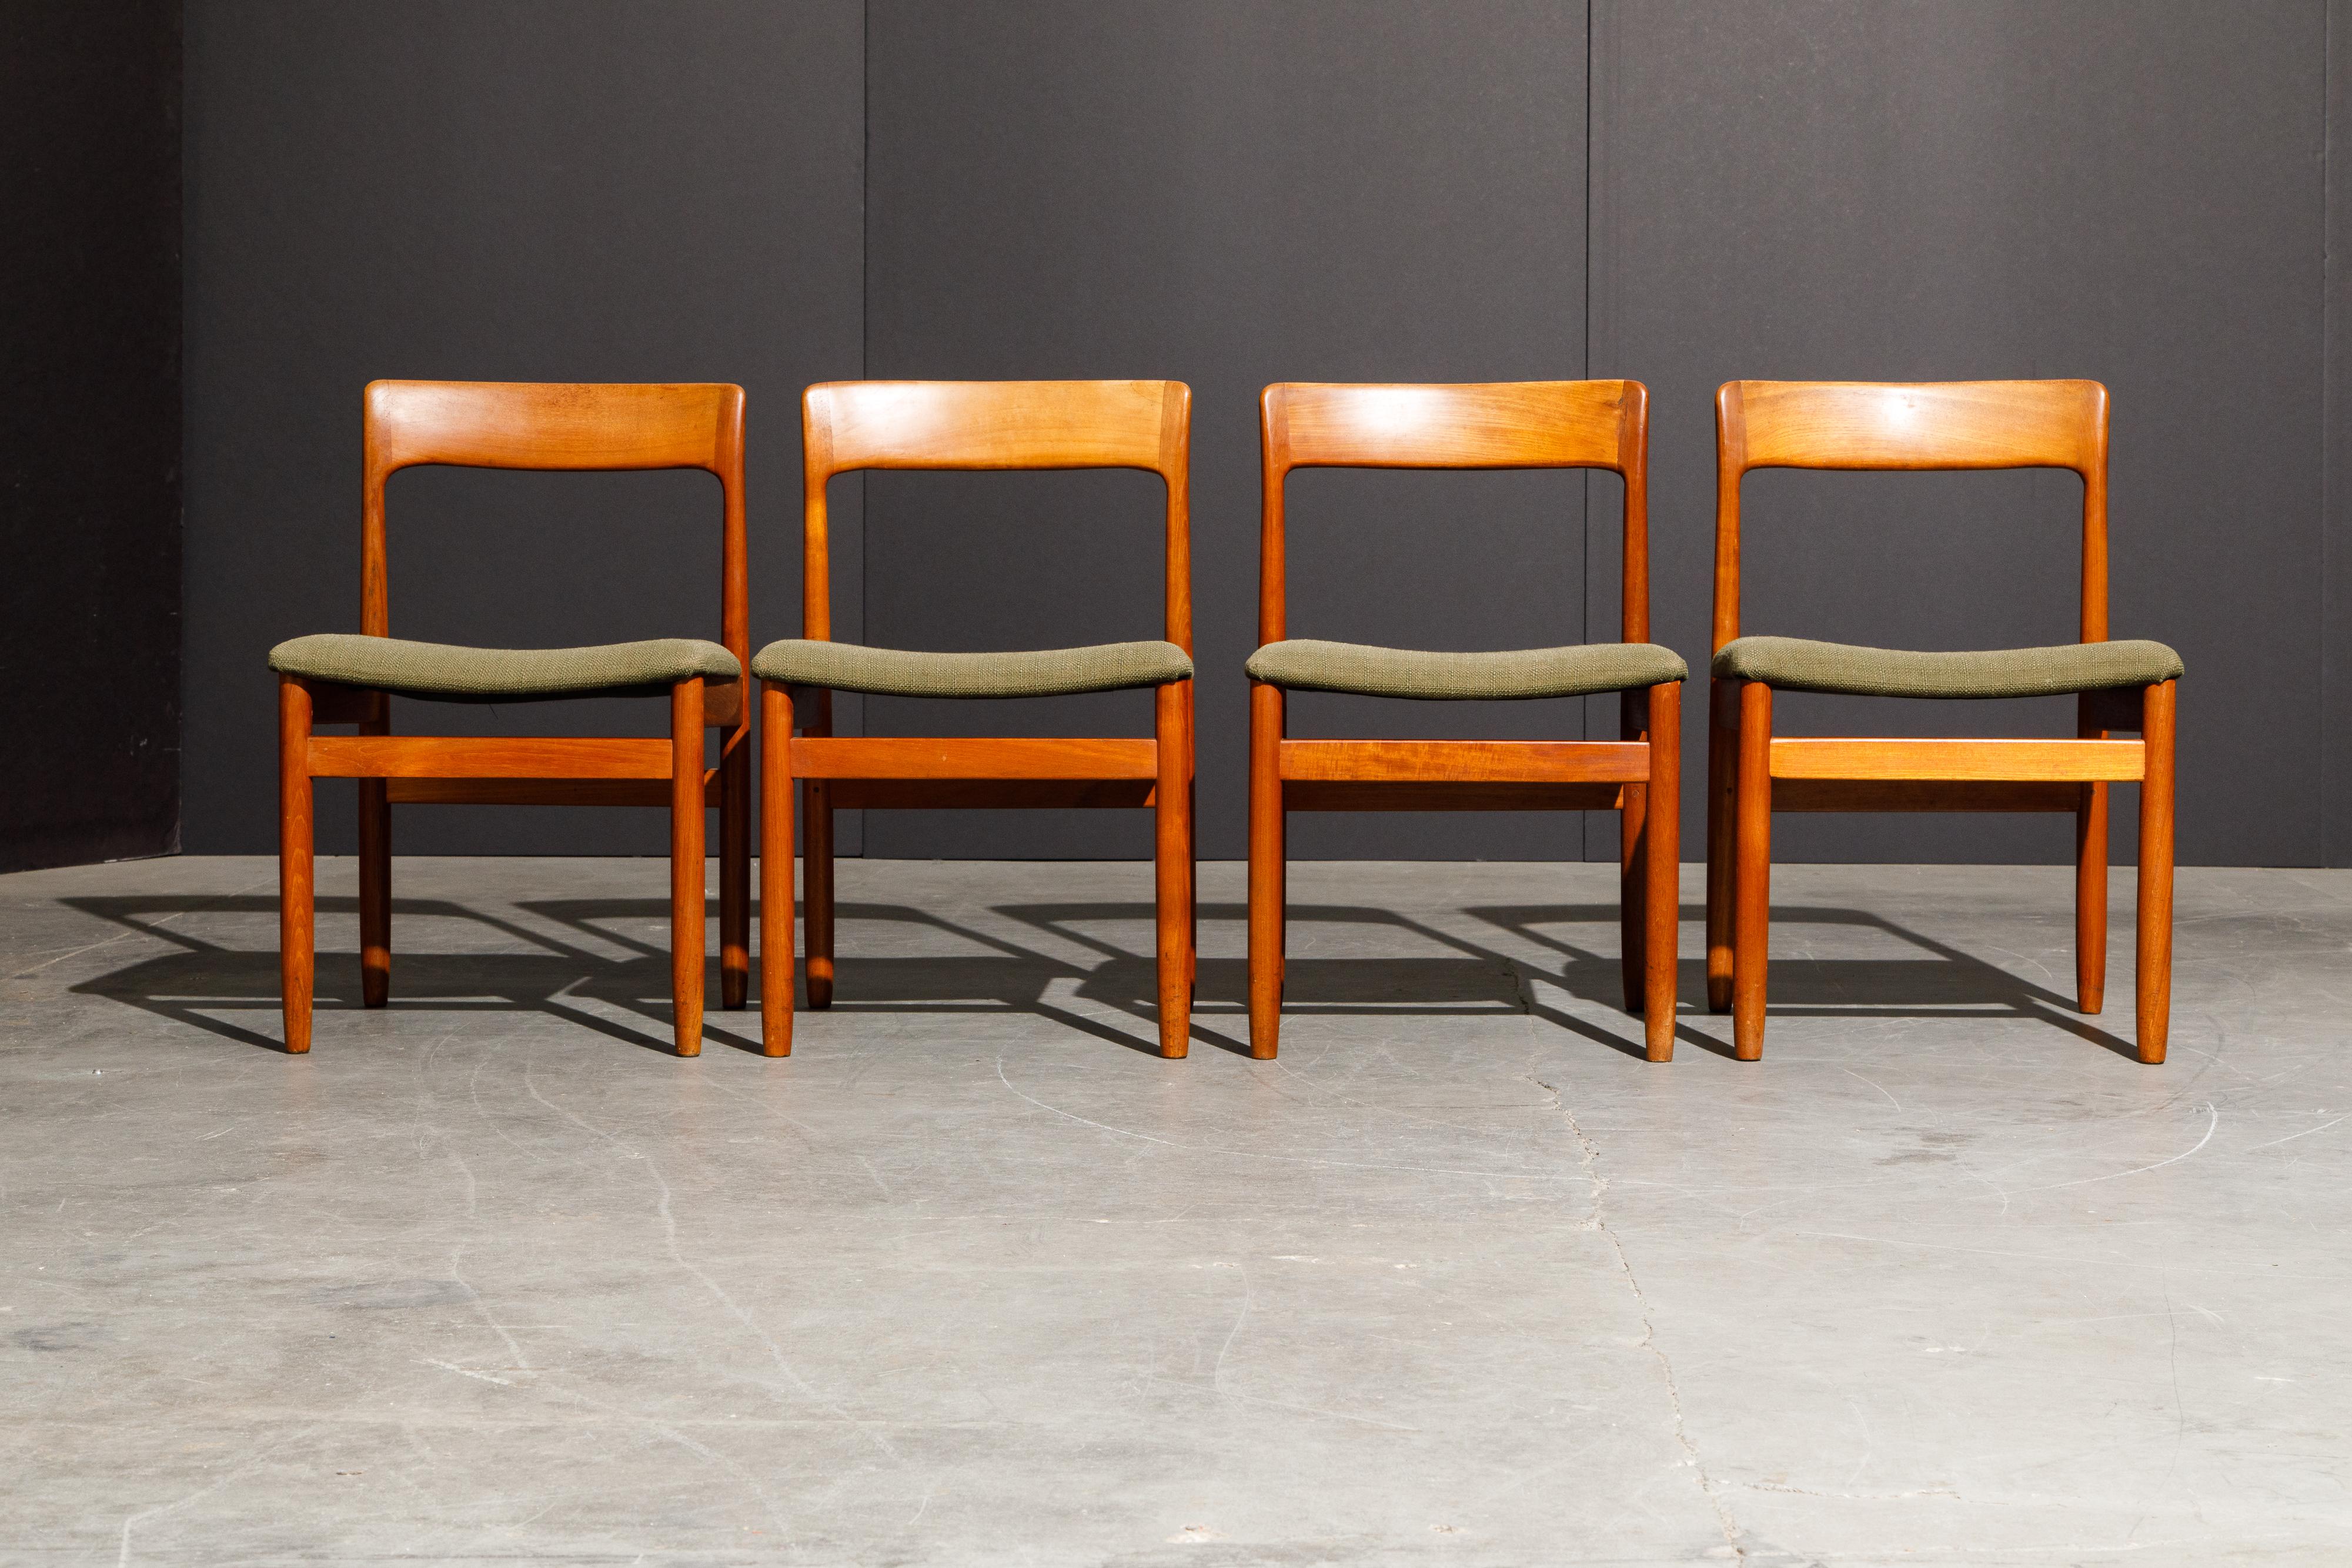 A set of four (4) classic Danish Modern teak side chairs in the style of Niels O. Møller for J.L. Møllers Møbelfabrik. The teak frames with curved seat backs are elegant and sophisticated, original fabric upholstered seats are ready for reupholstery